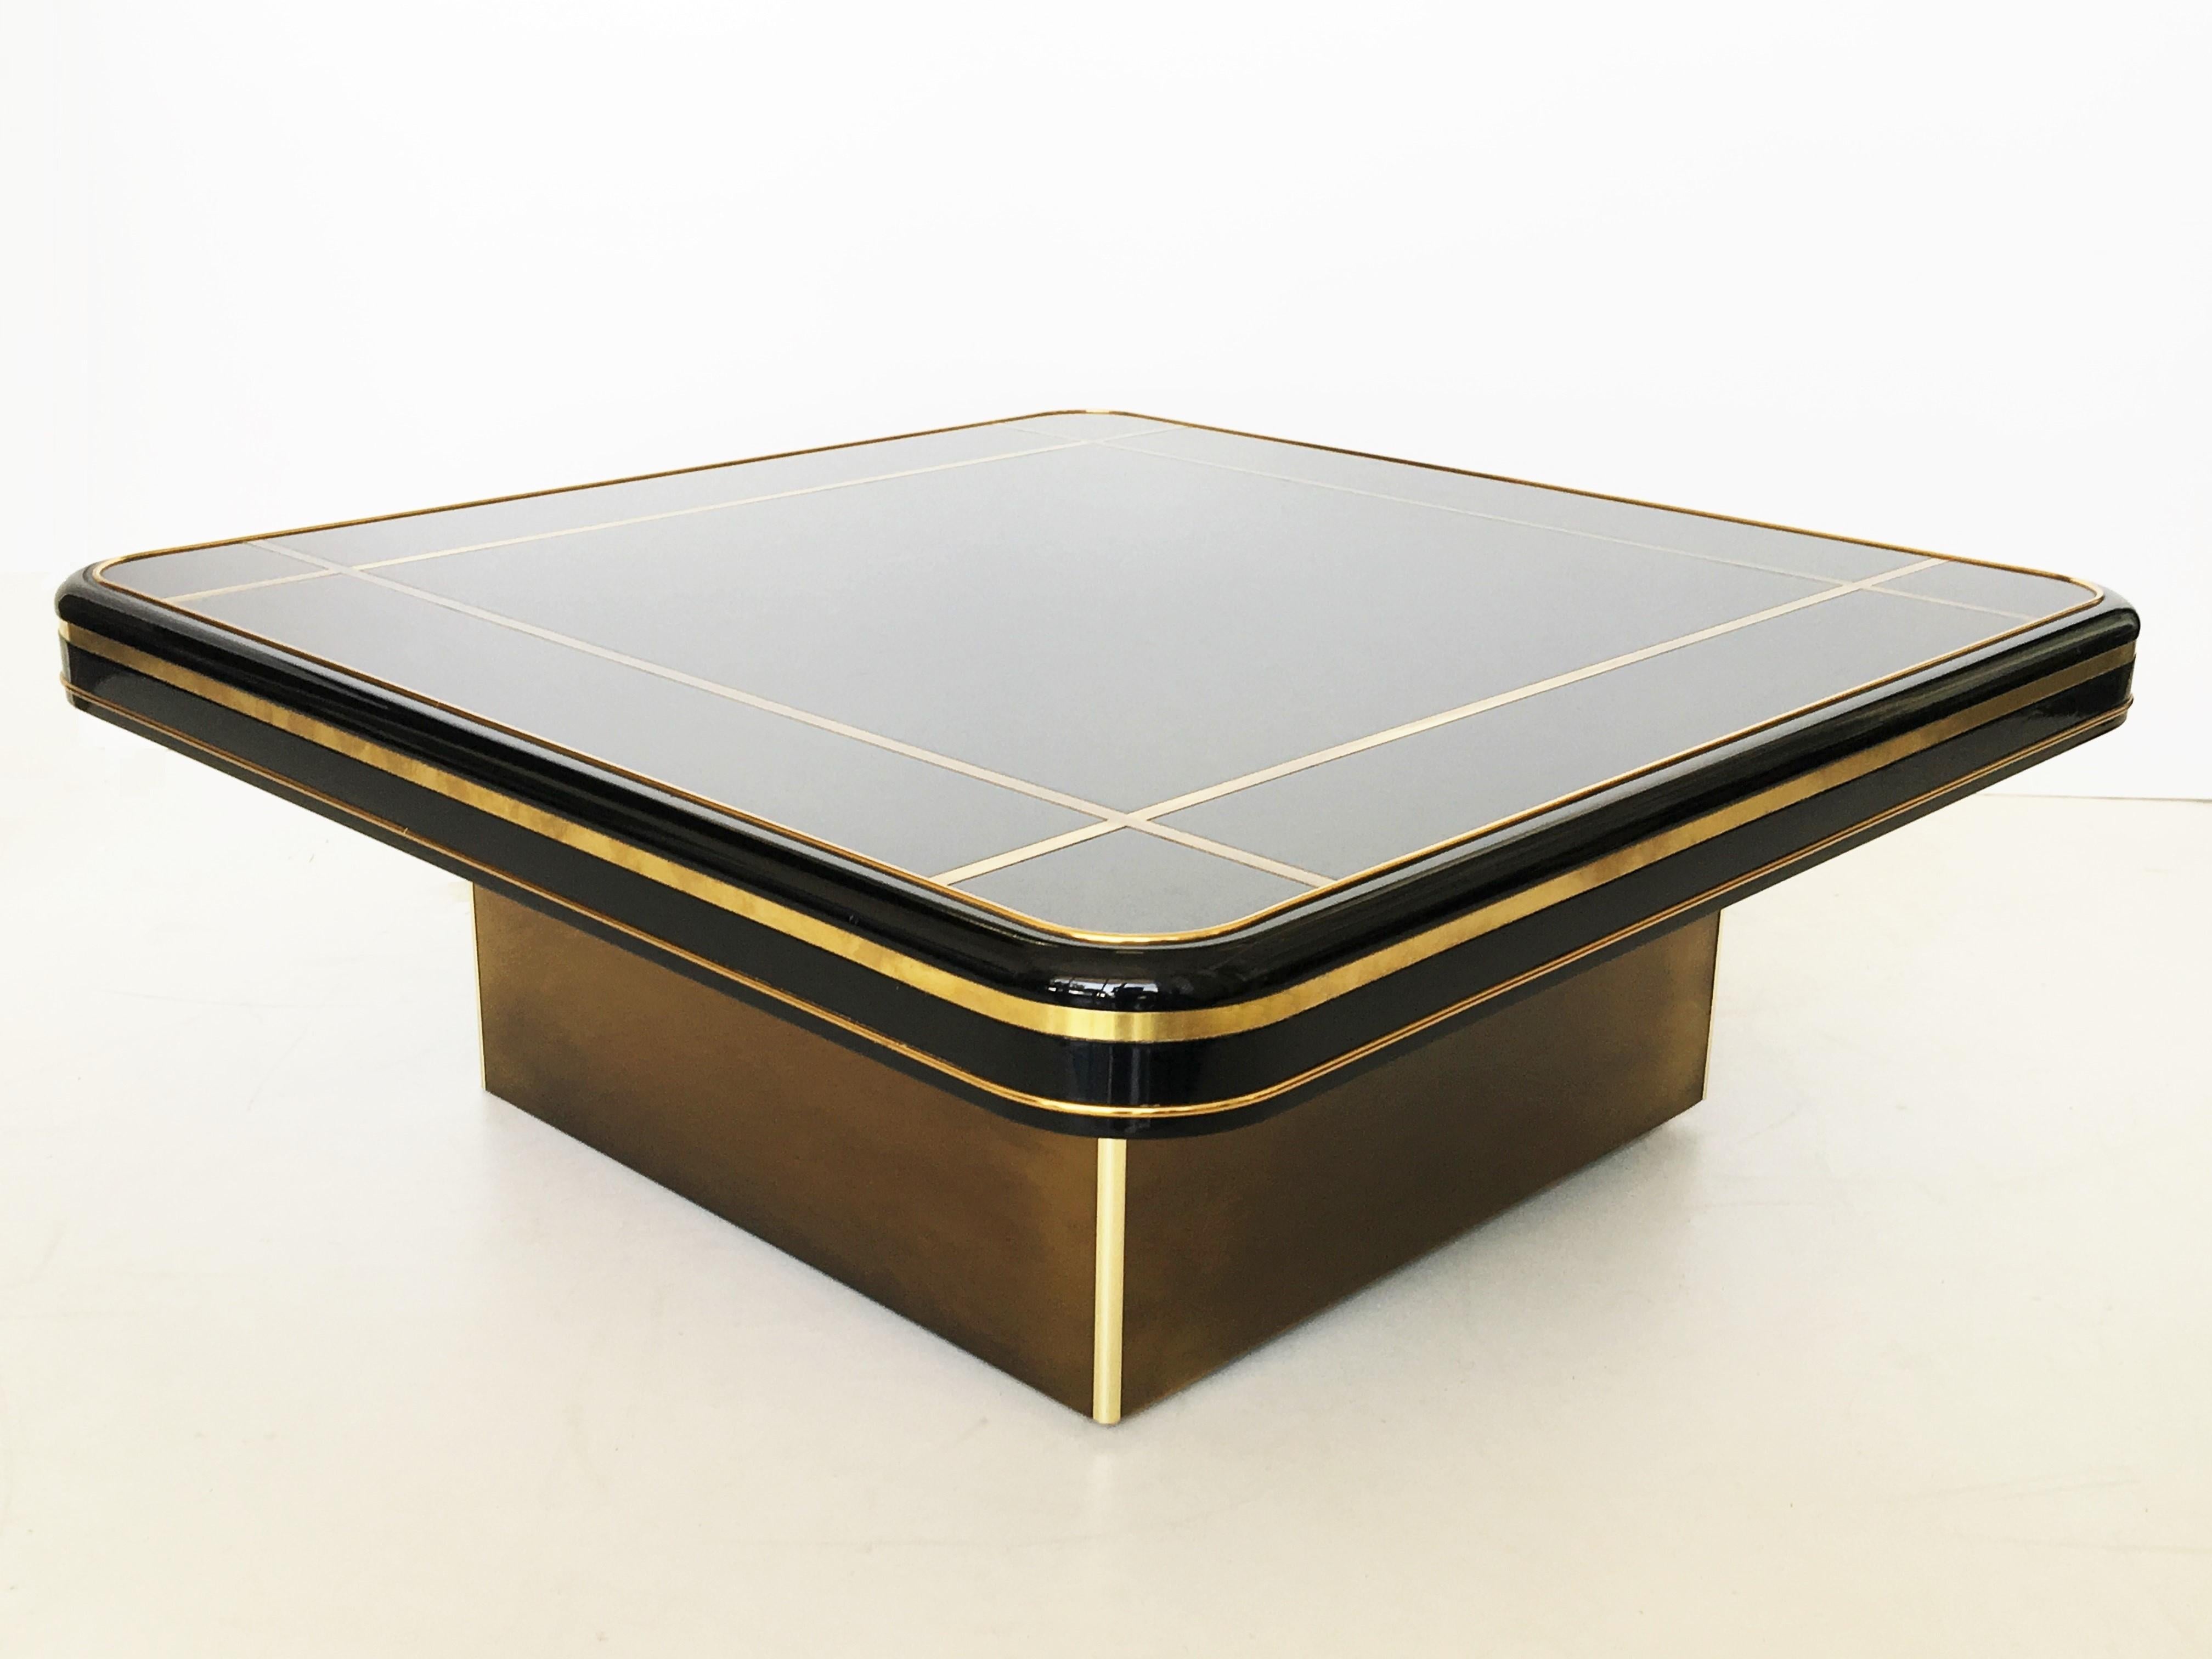 Mastercraft coffee table featuring a brass platform base supports a square top with inset dark brown surface and decorative brass banding, original finish.